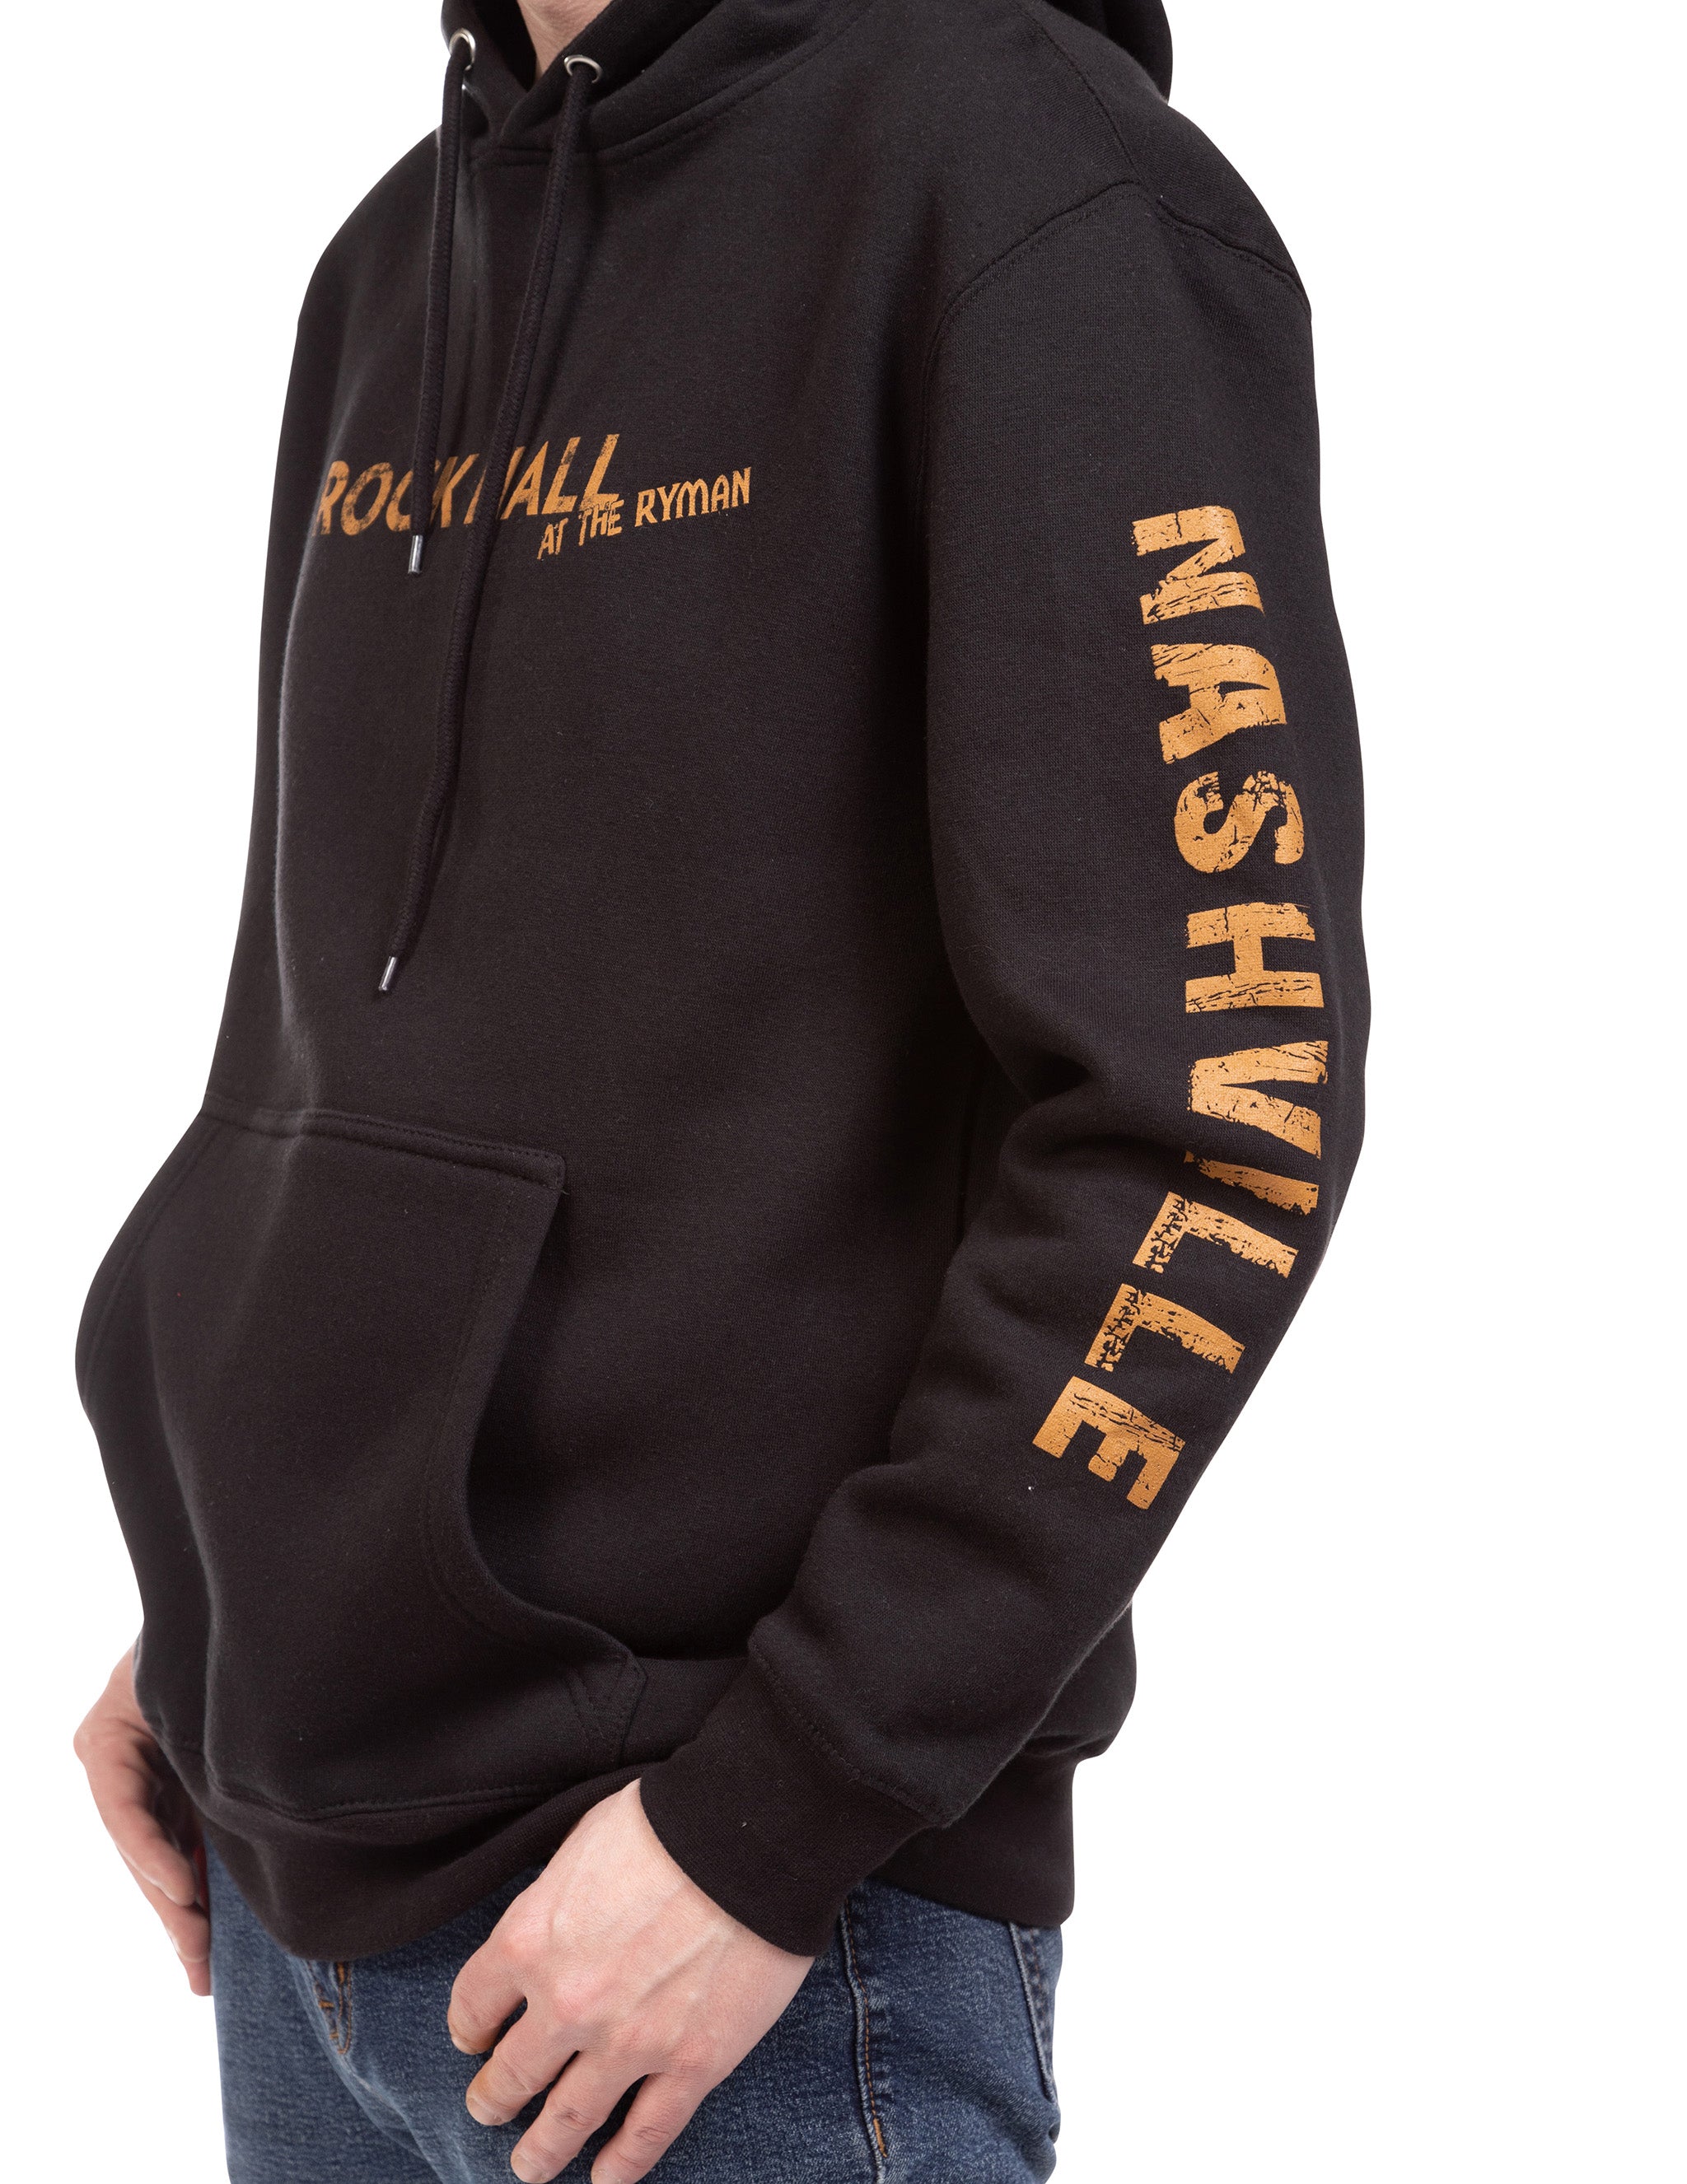 Rock Hall at The Ryman Rock and Roll Soul Unisex Hoodie